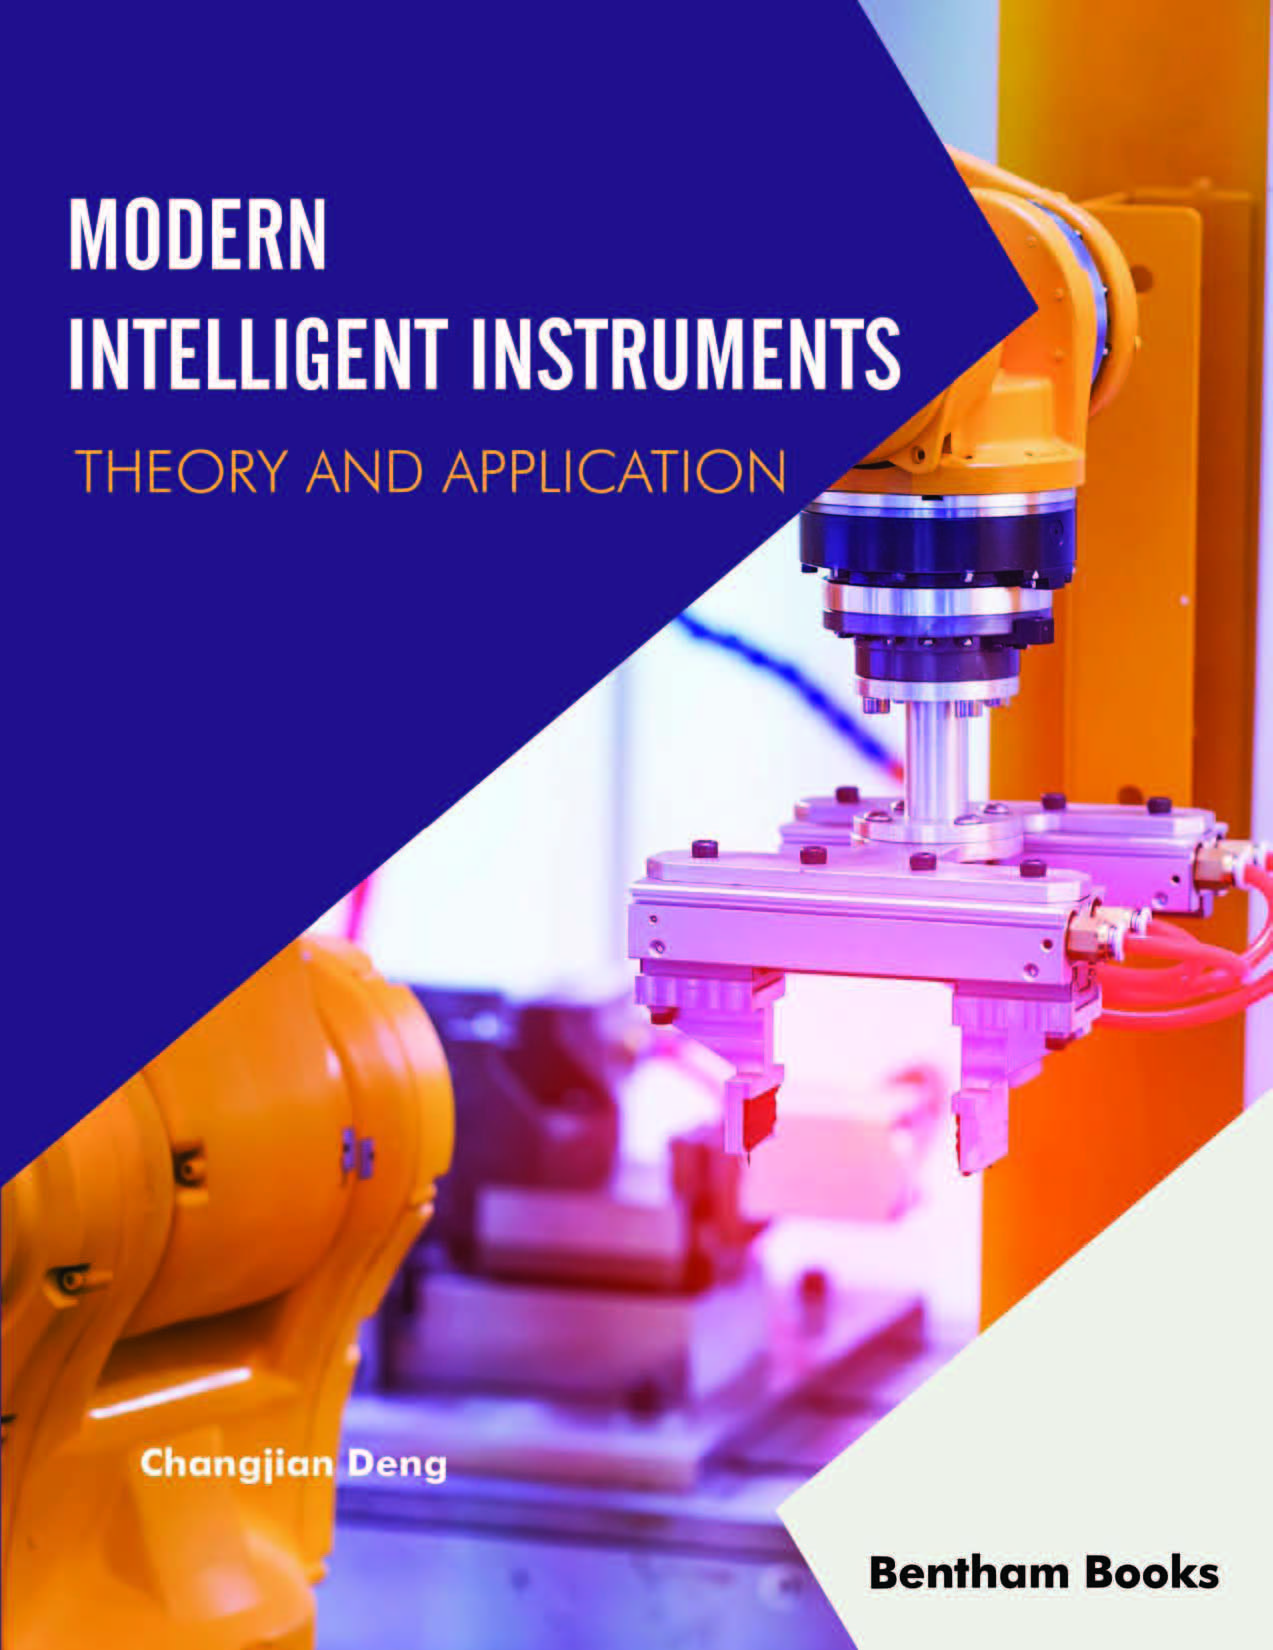 Modern Intelligent Instruments - Theory and Application